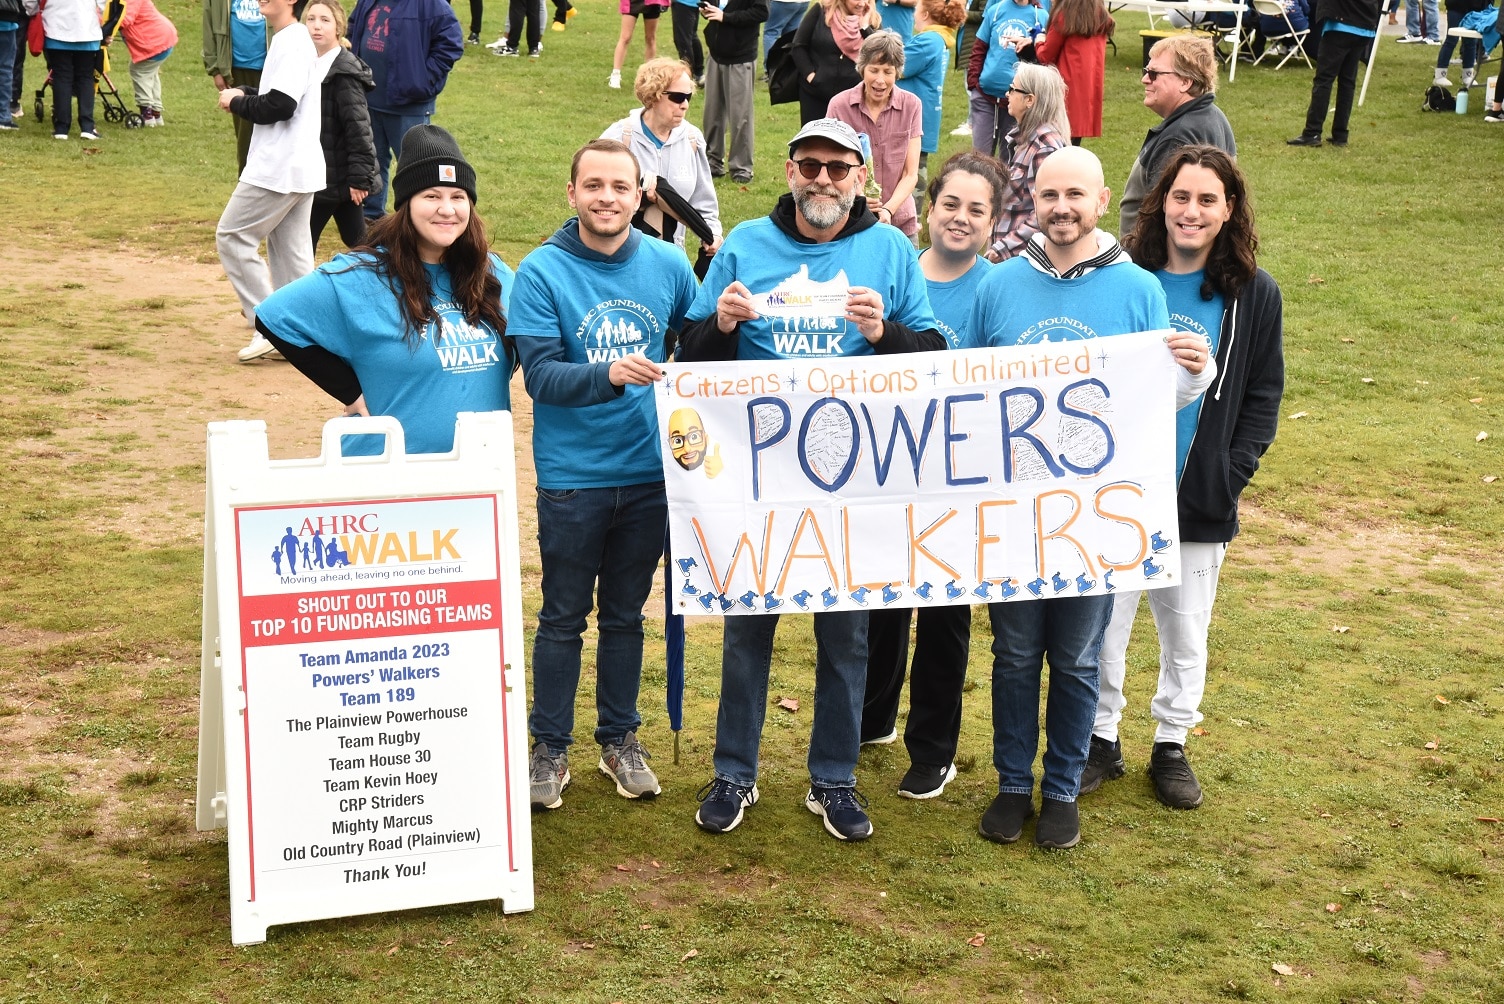 The "Powers Walkers" team poses for a photo at the AHRC Foundation Walk